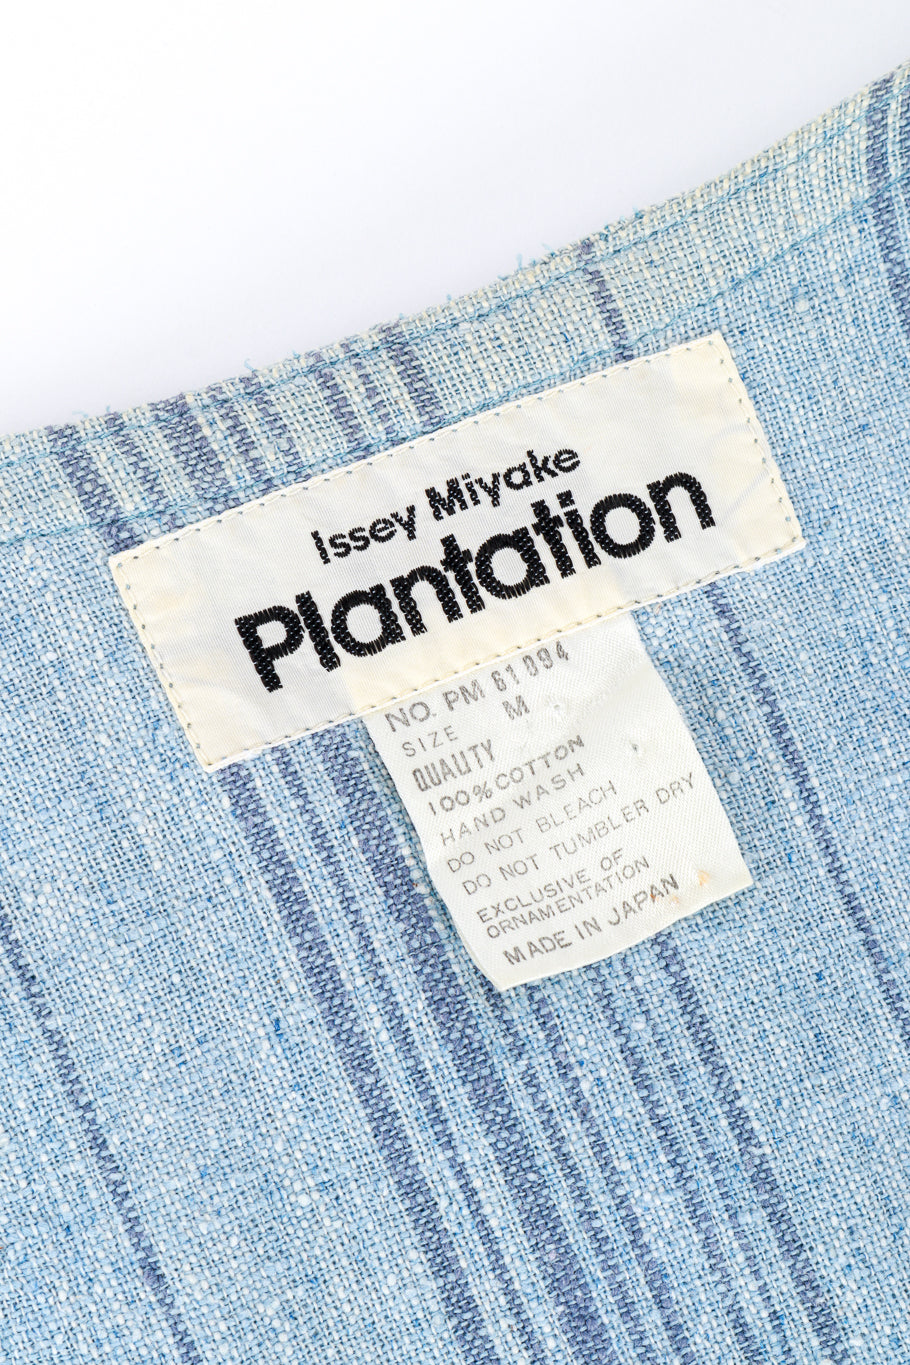 Vintage Issey Miyake plantation raw cotton duster flat lay detail of duster label with makers mark and garment care details @RECESS LA